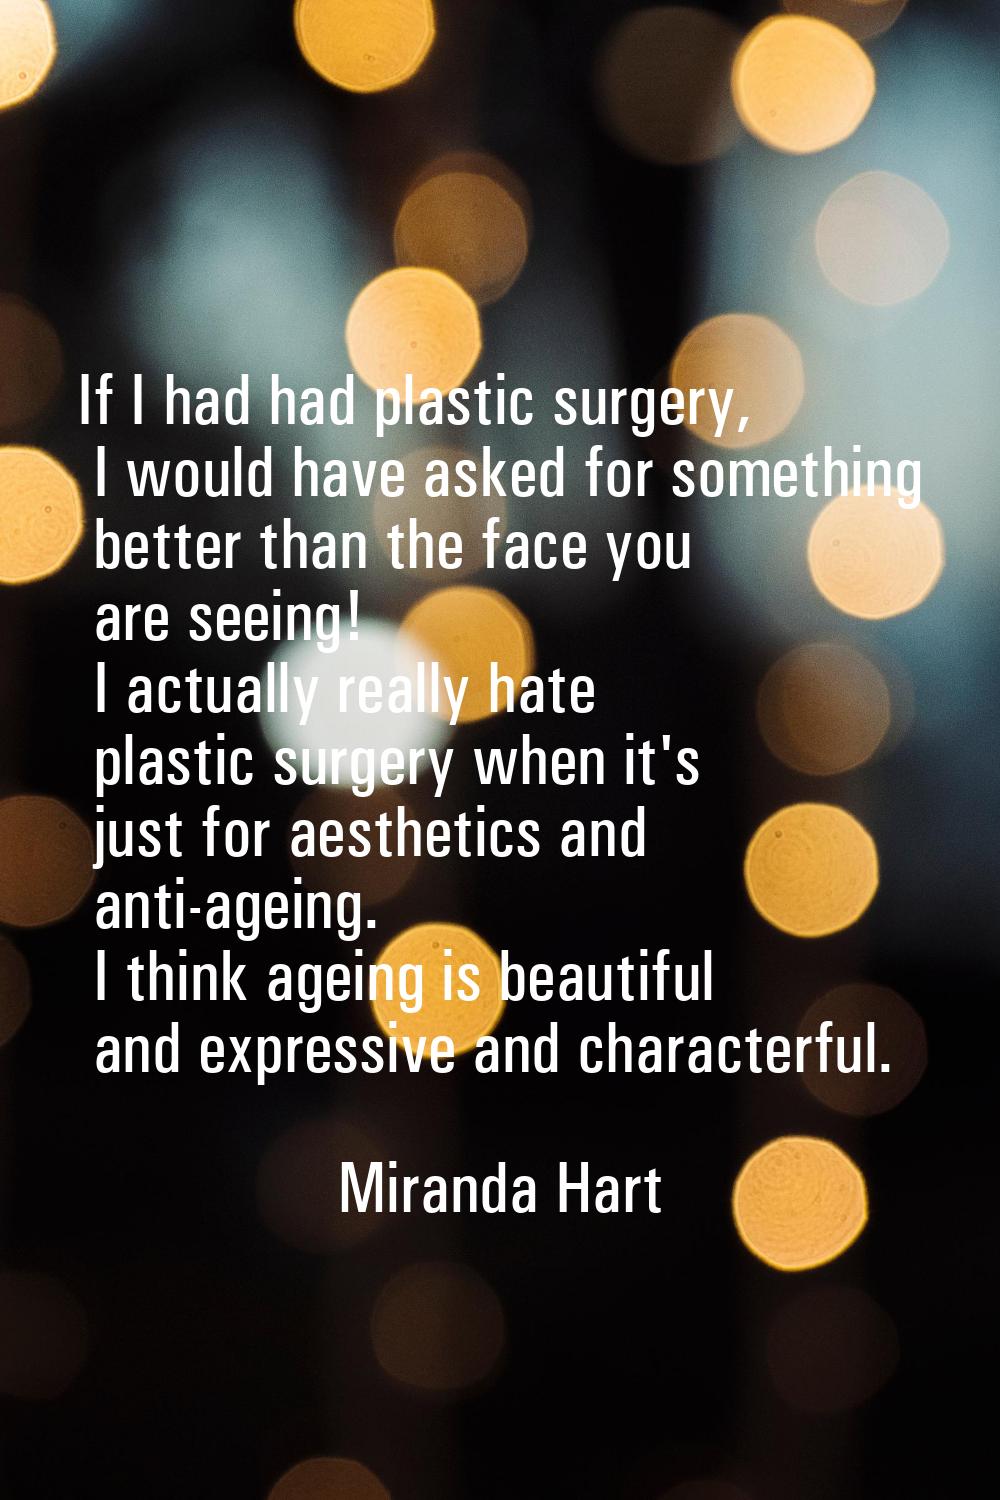 If I had had plastic surgery, I would have asked for something better than the face you are seeing!